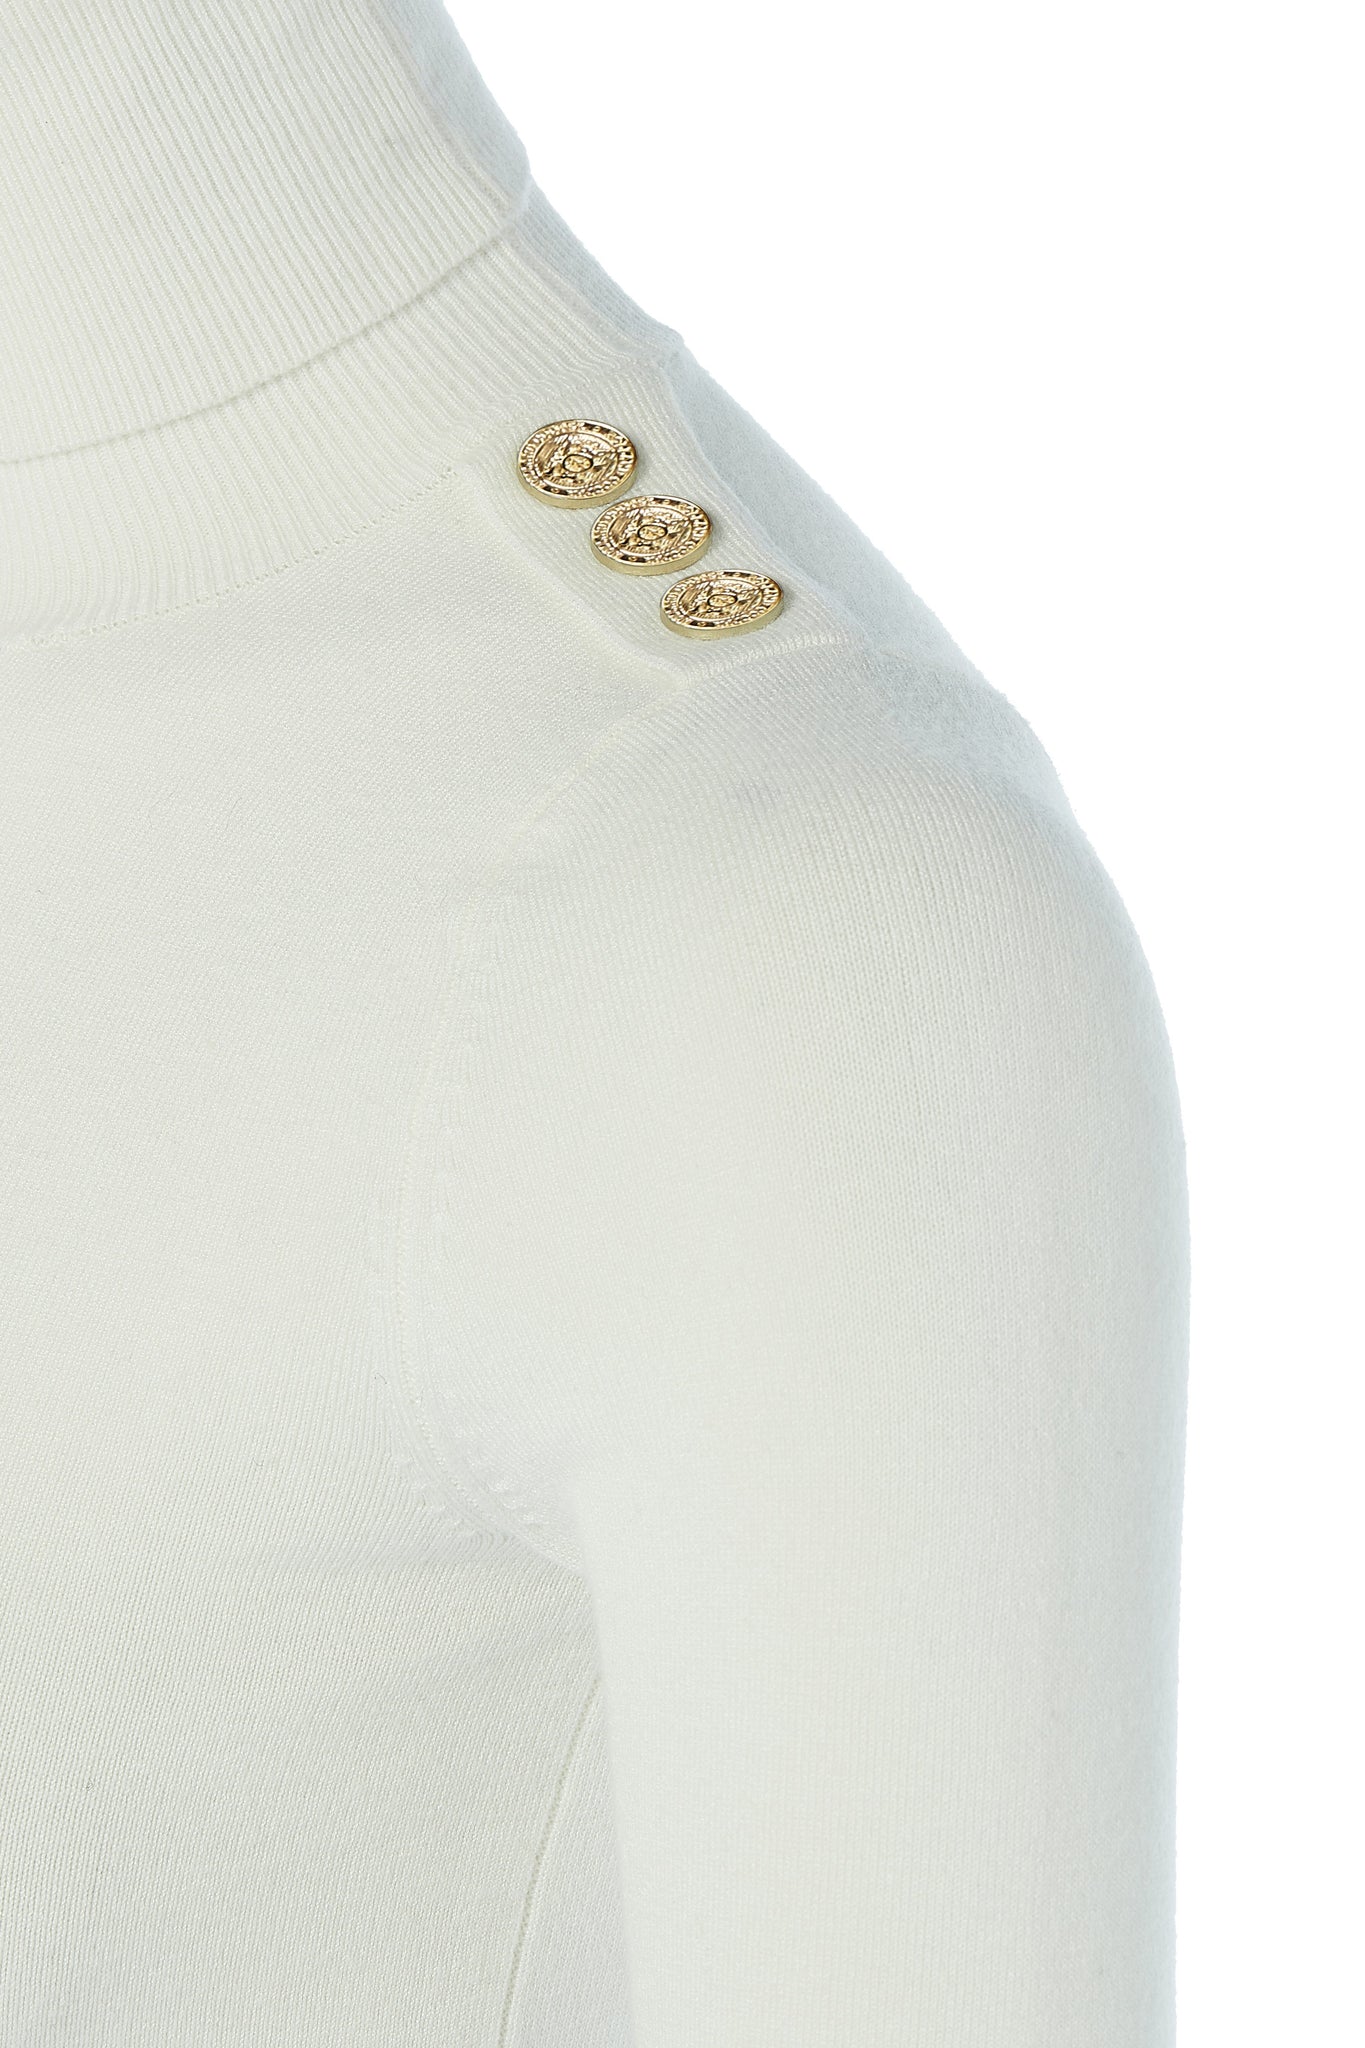 gold button detail across the shoulders of super soft lightweight jumper in cream with ribbed roll neck collar, cuffs and hem